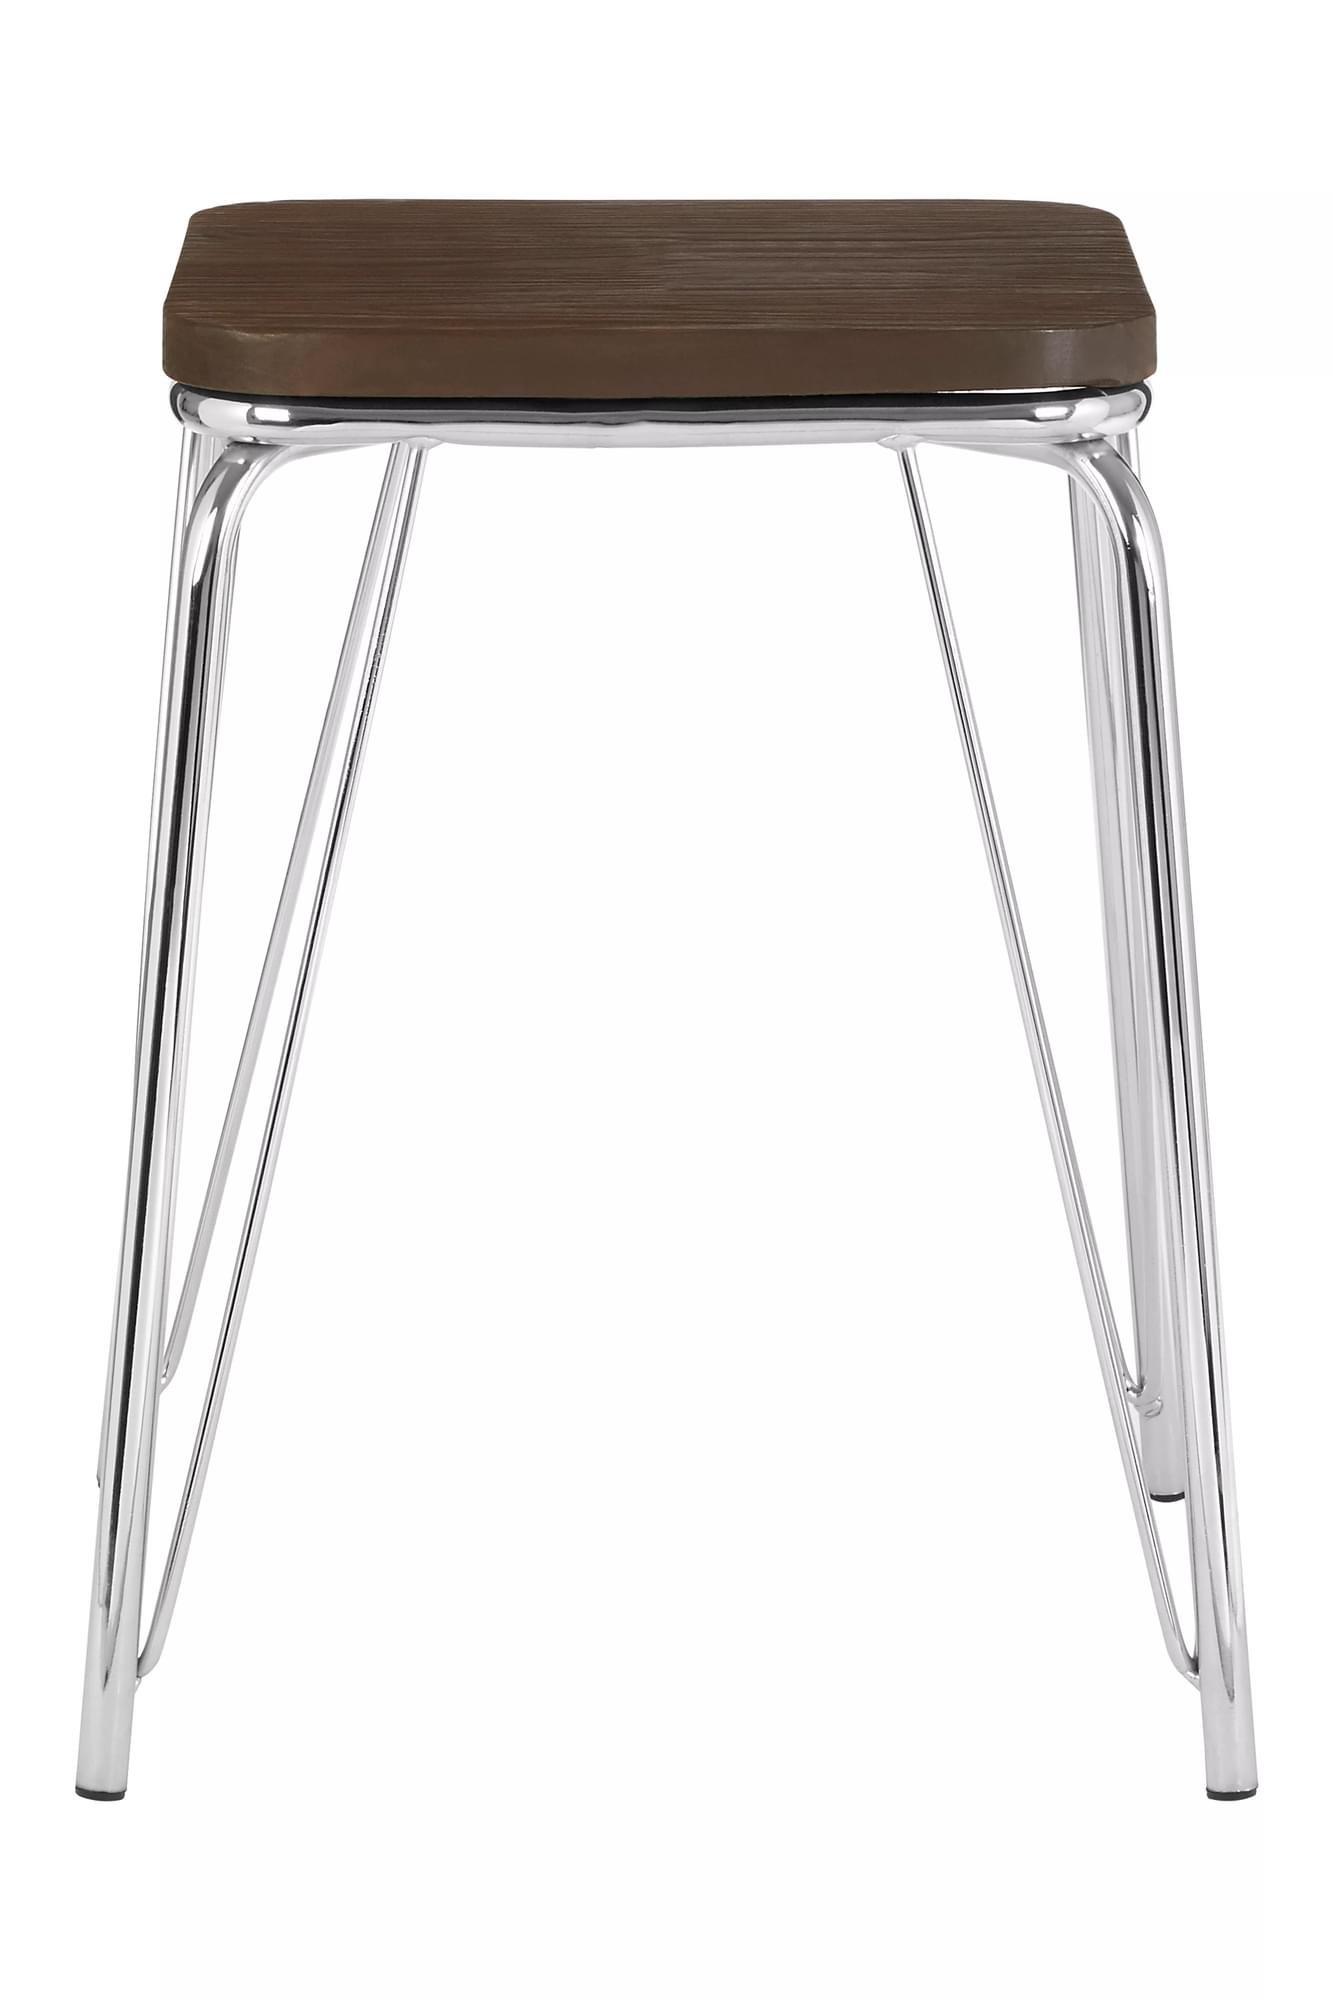 Interiors by Premier Chrome Metal and Elm Wood Stool, Small Square Stool, Accent Wooden Stool for Ho